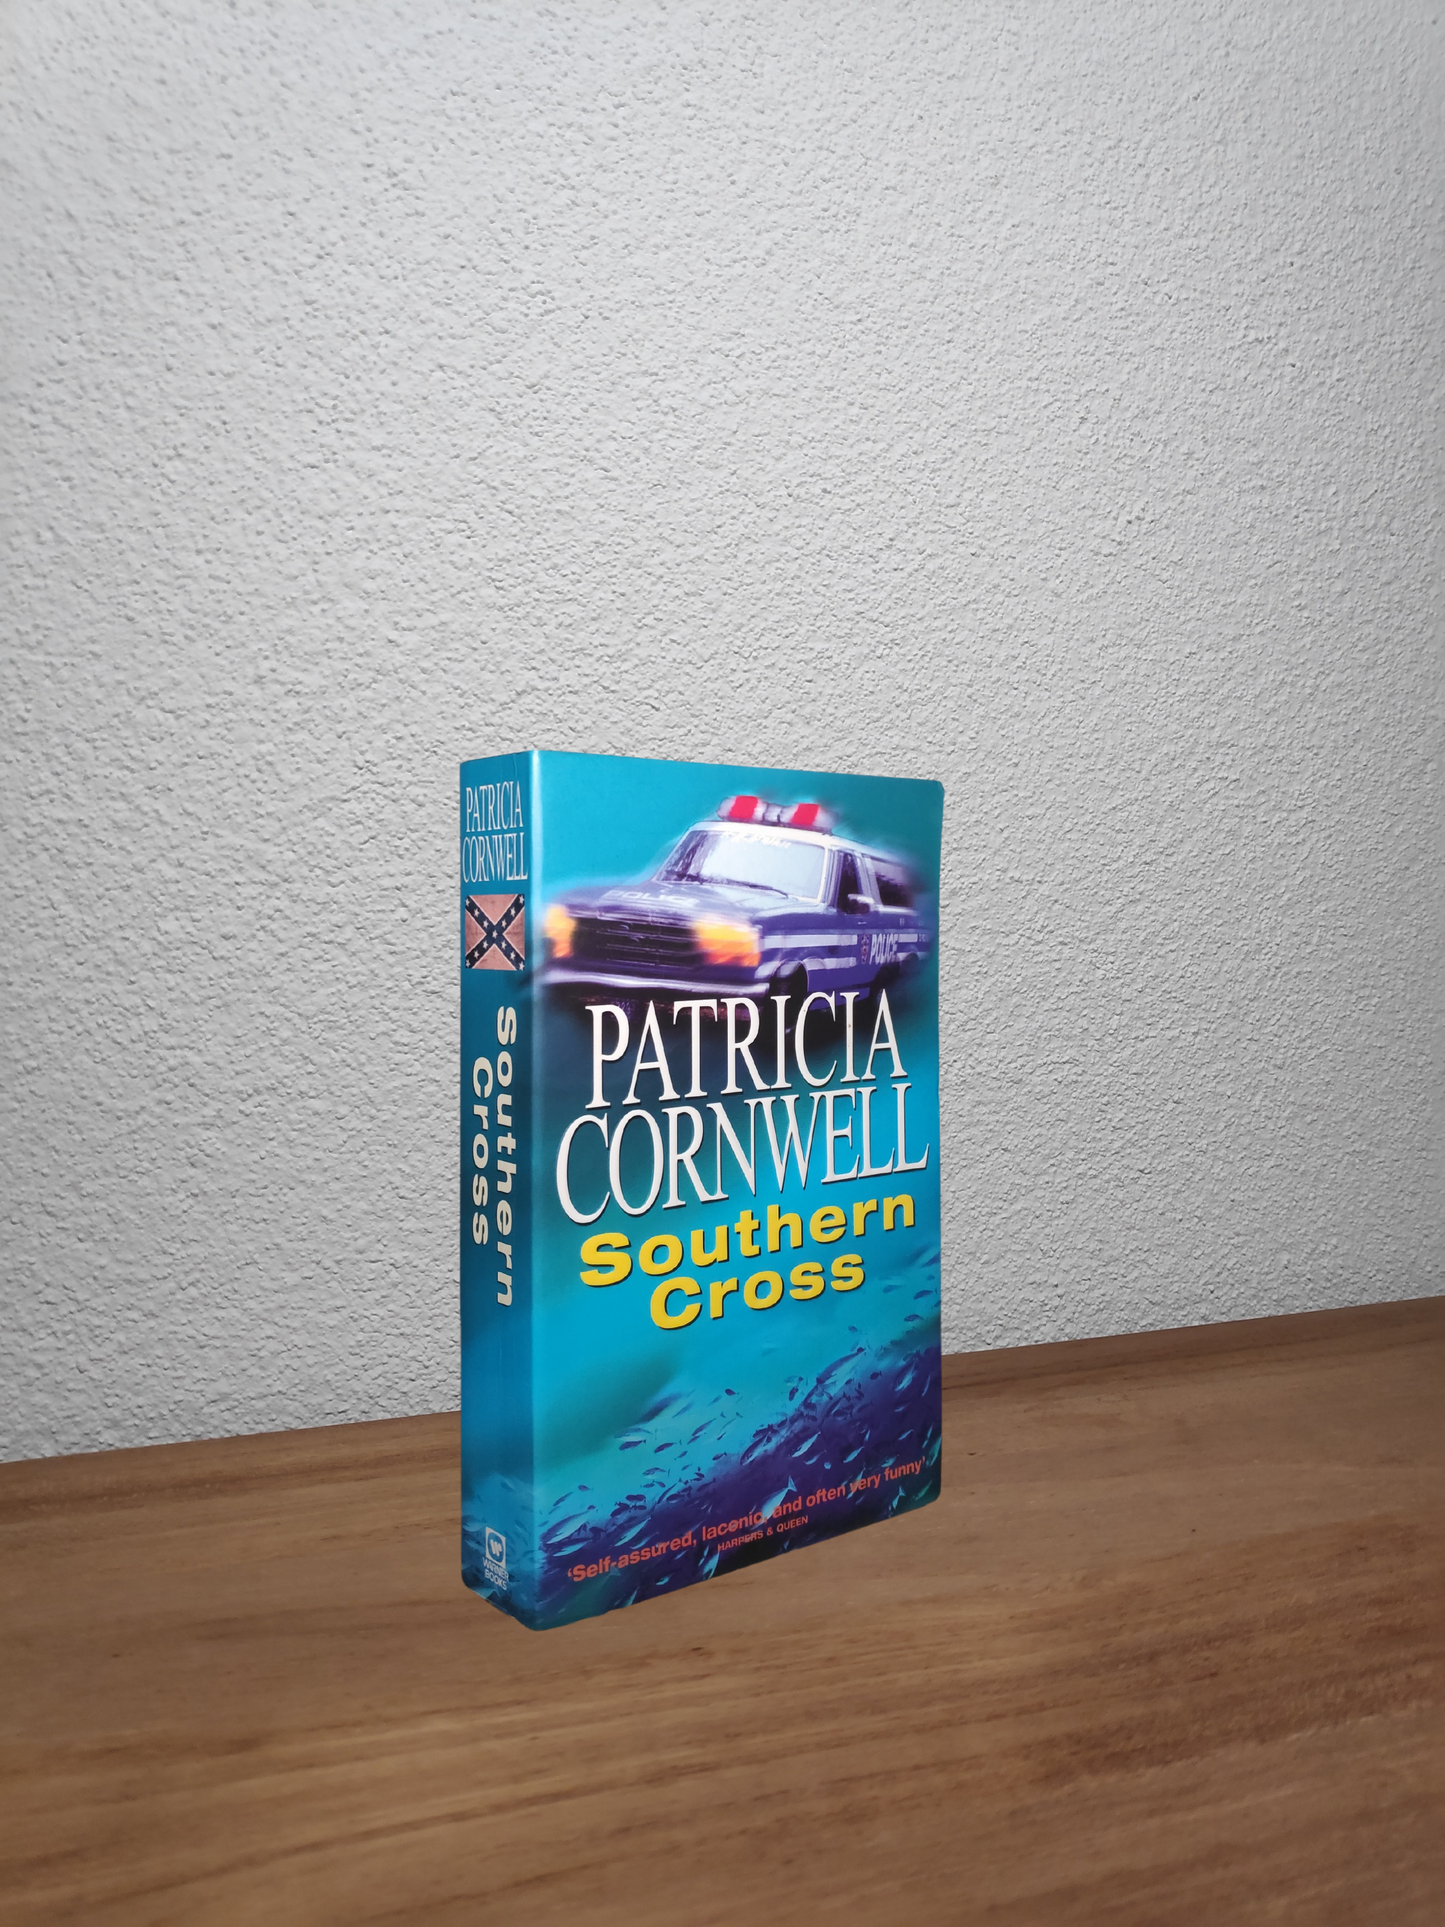 Patricia Cornwell - Southern Cross  - Second-hand english book to deliver in Zurich & Switzerland